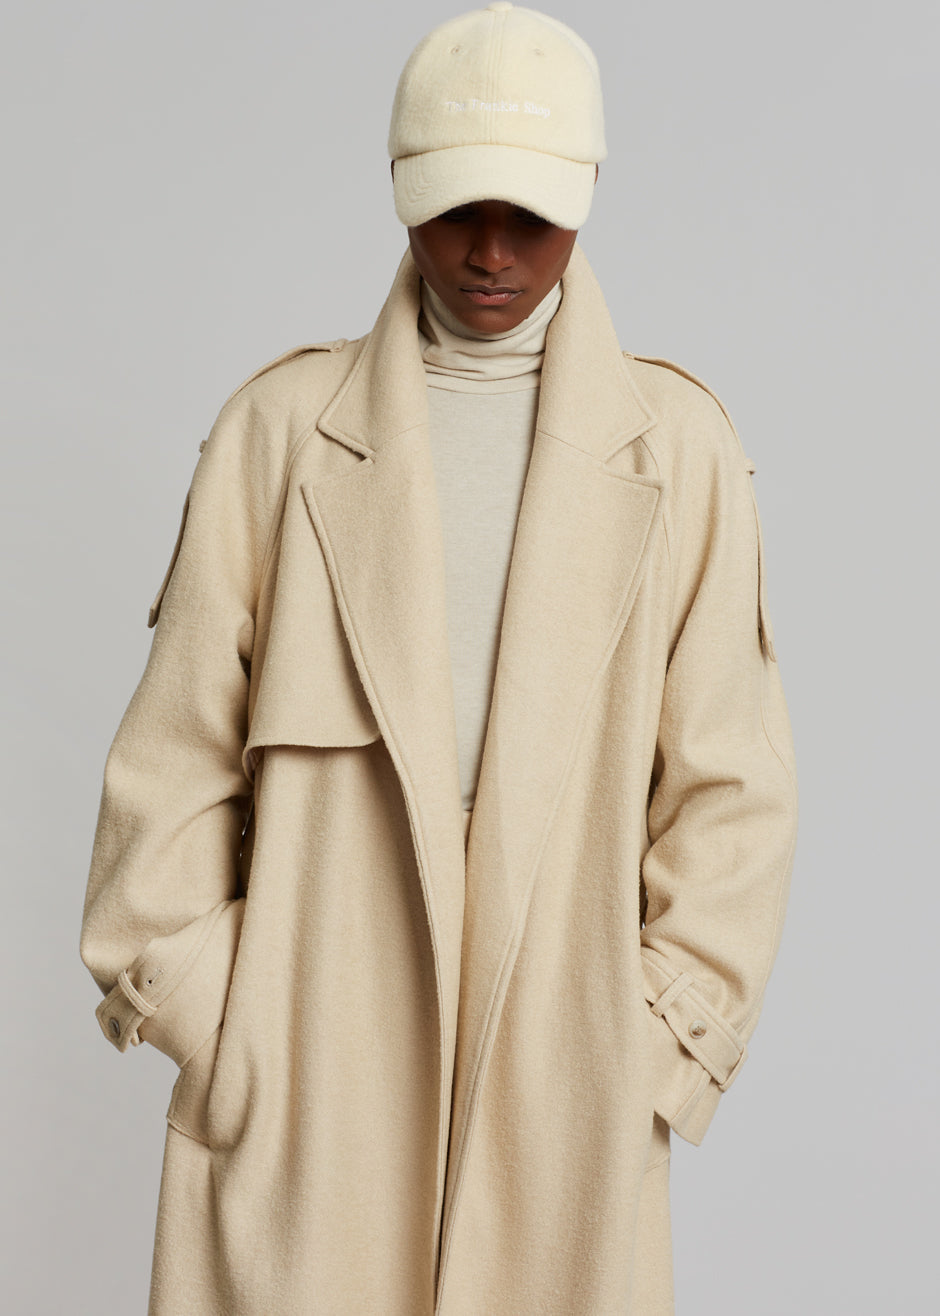 Suzanne Boiled Wool Trench Coat - Beige - 4